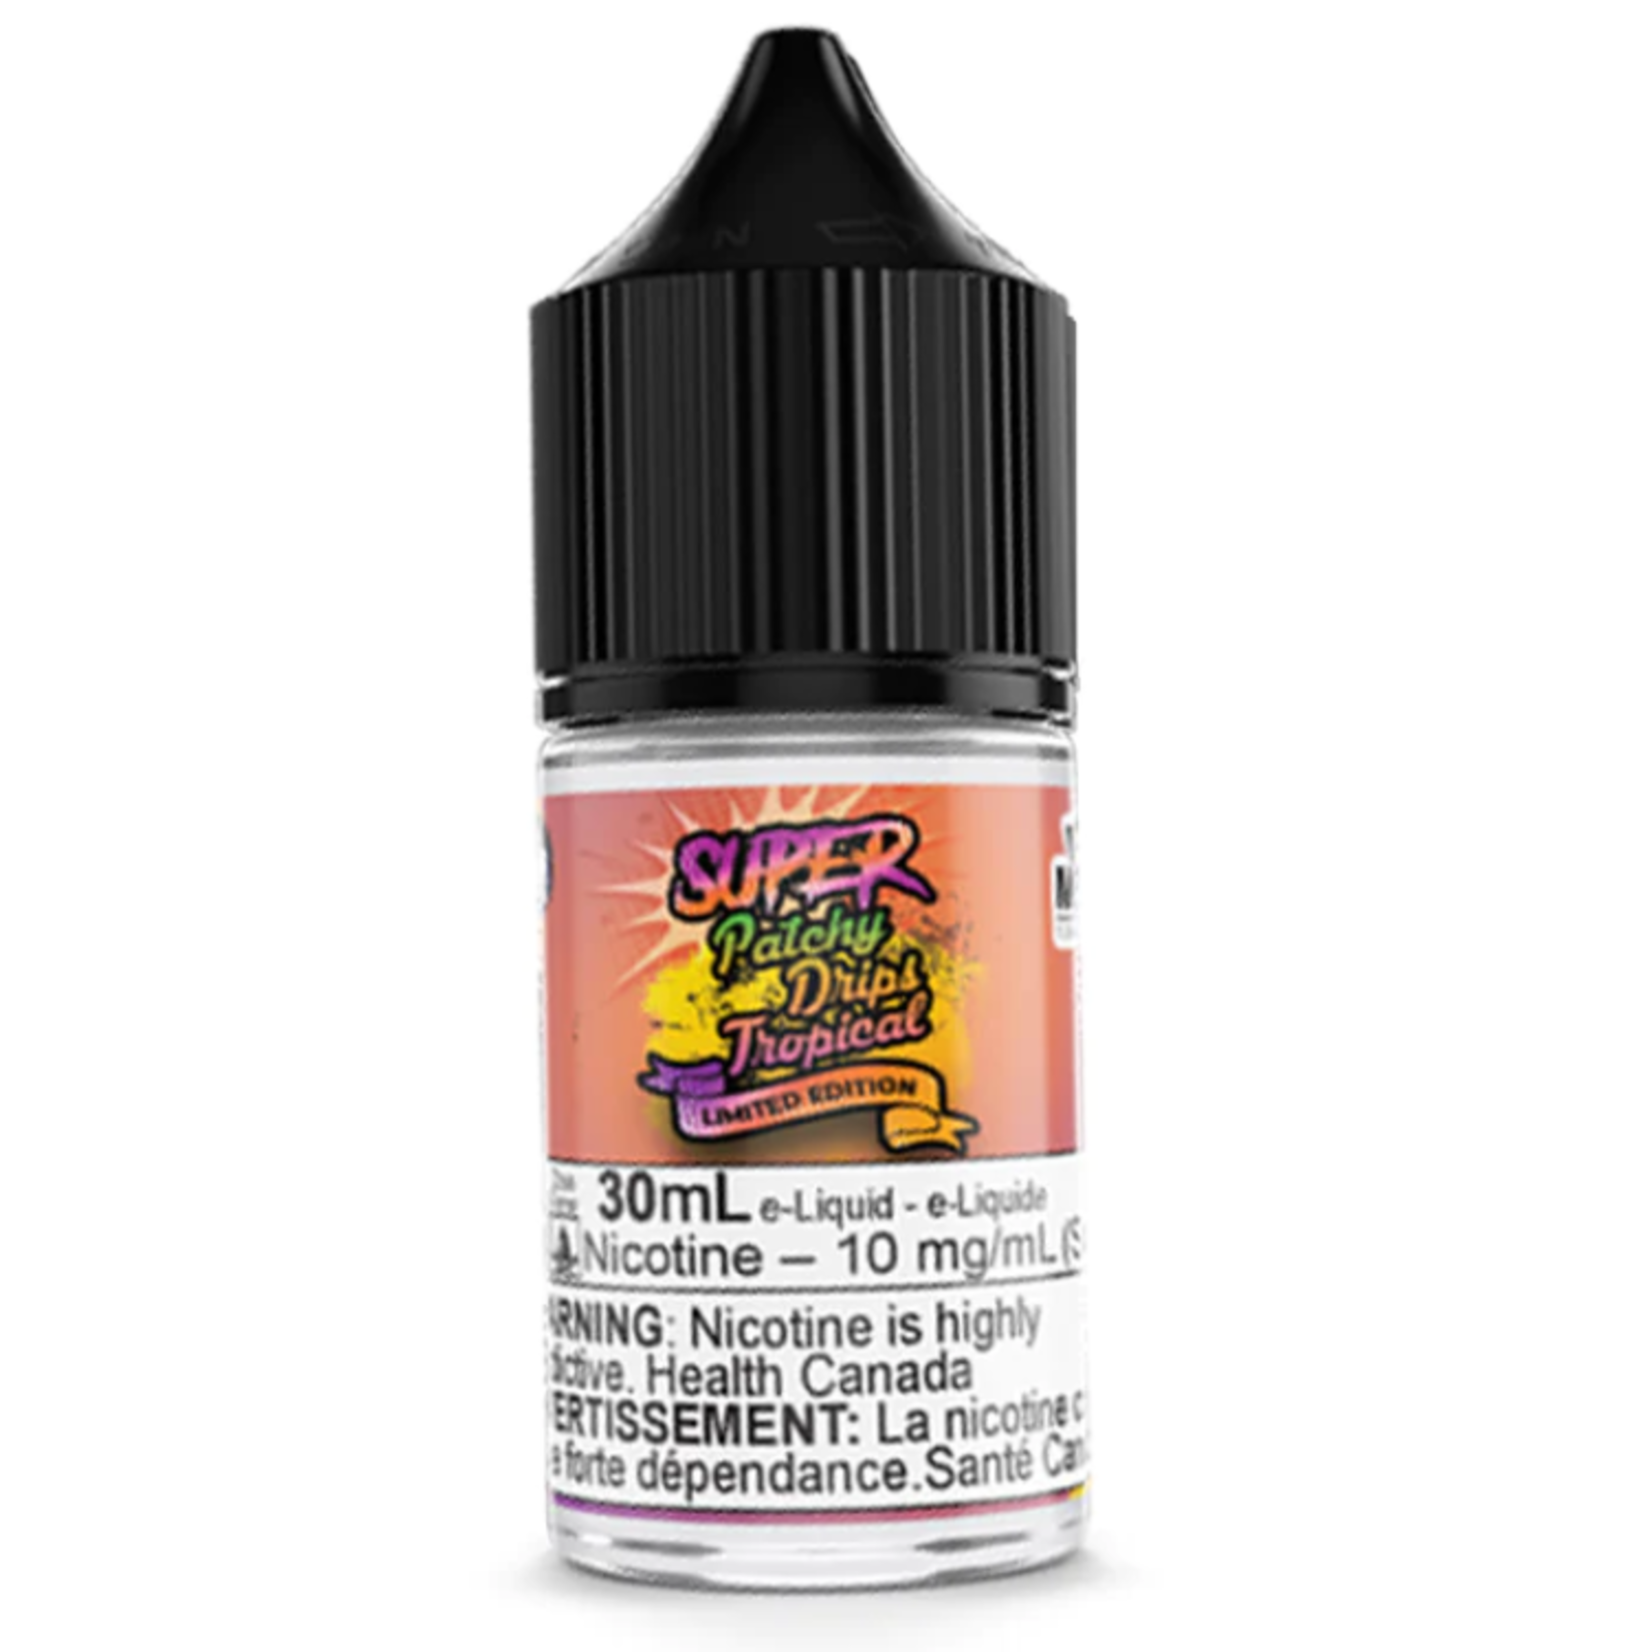 Mind Blown Vape Co. Salty Patchy Drips